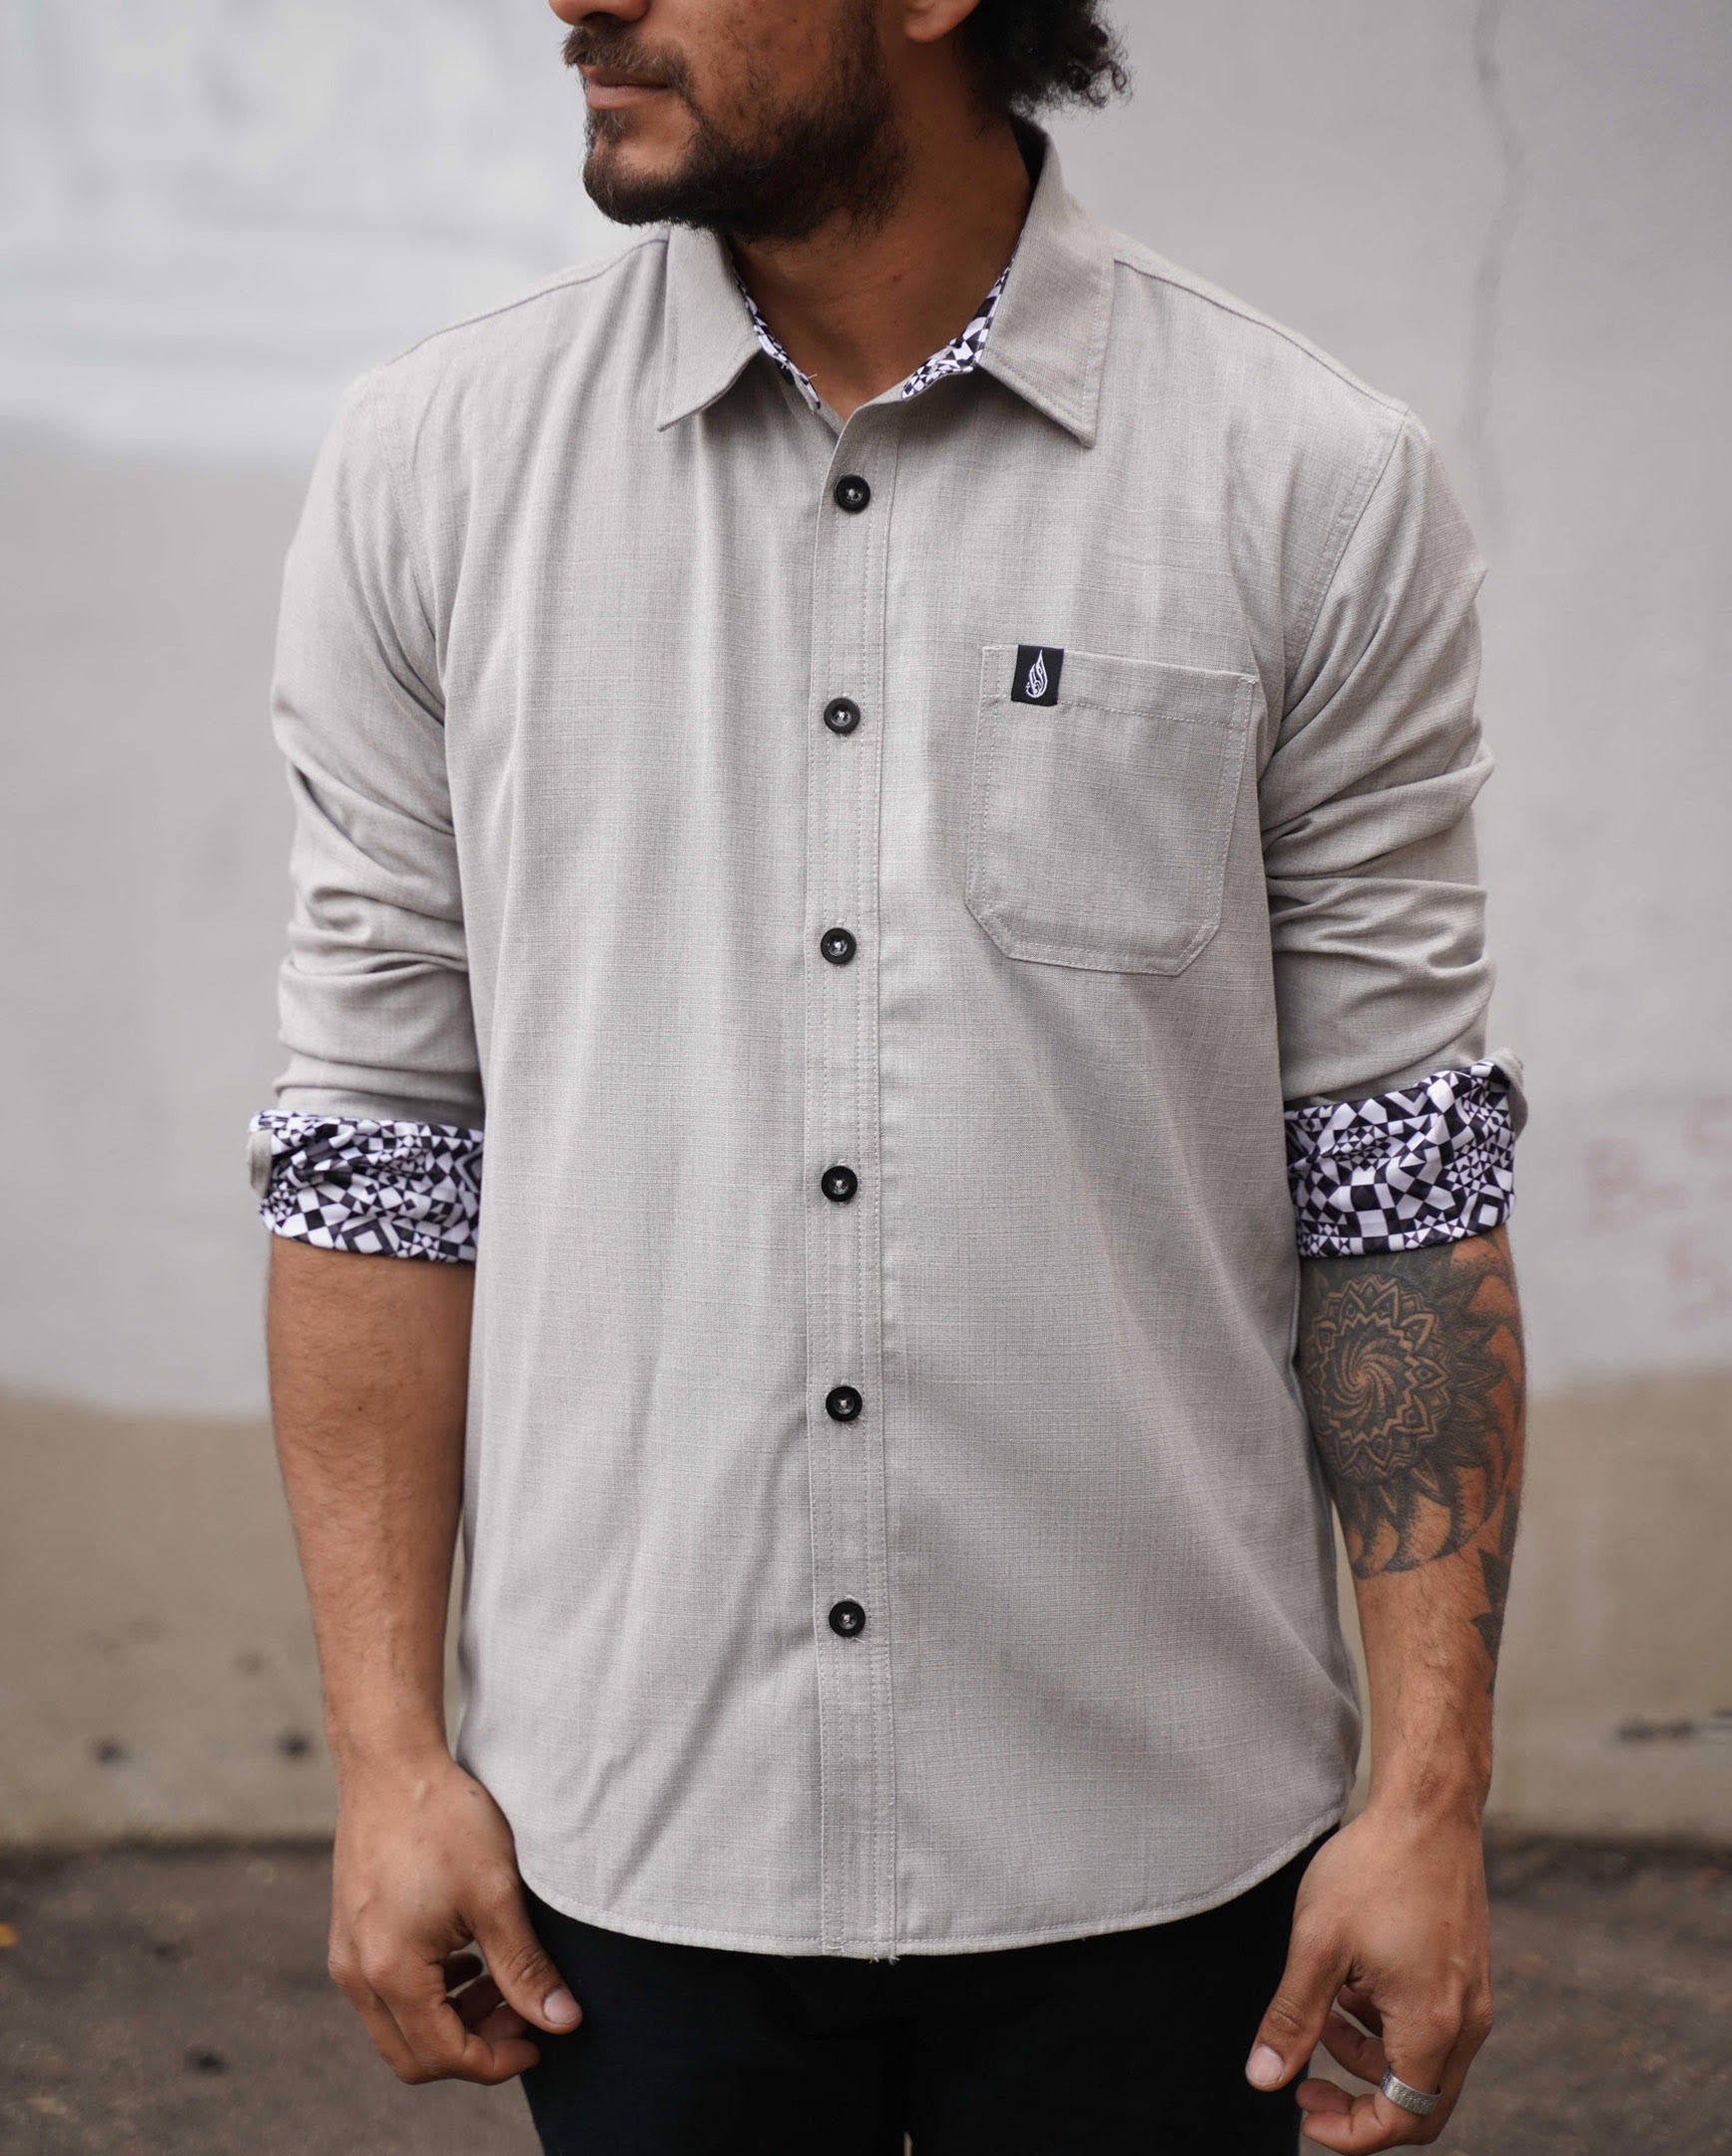 Equilateral Button Down Shirt by Threyda